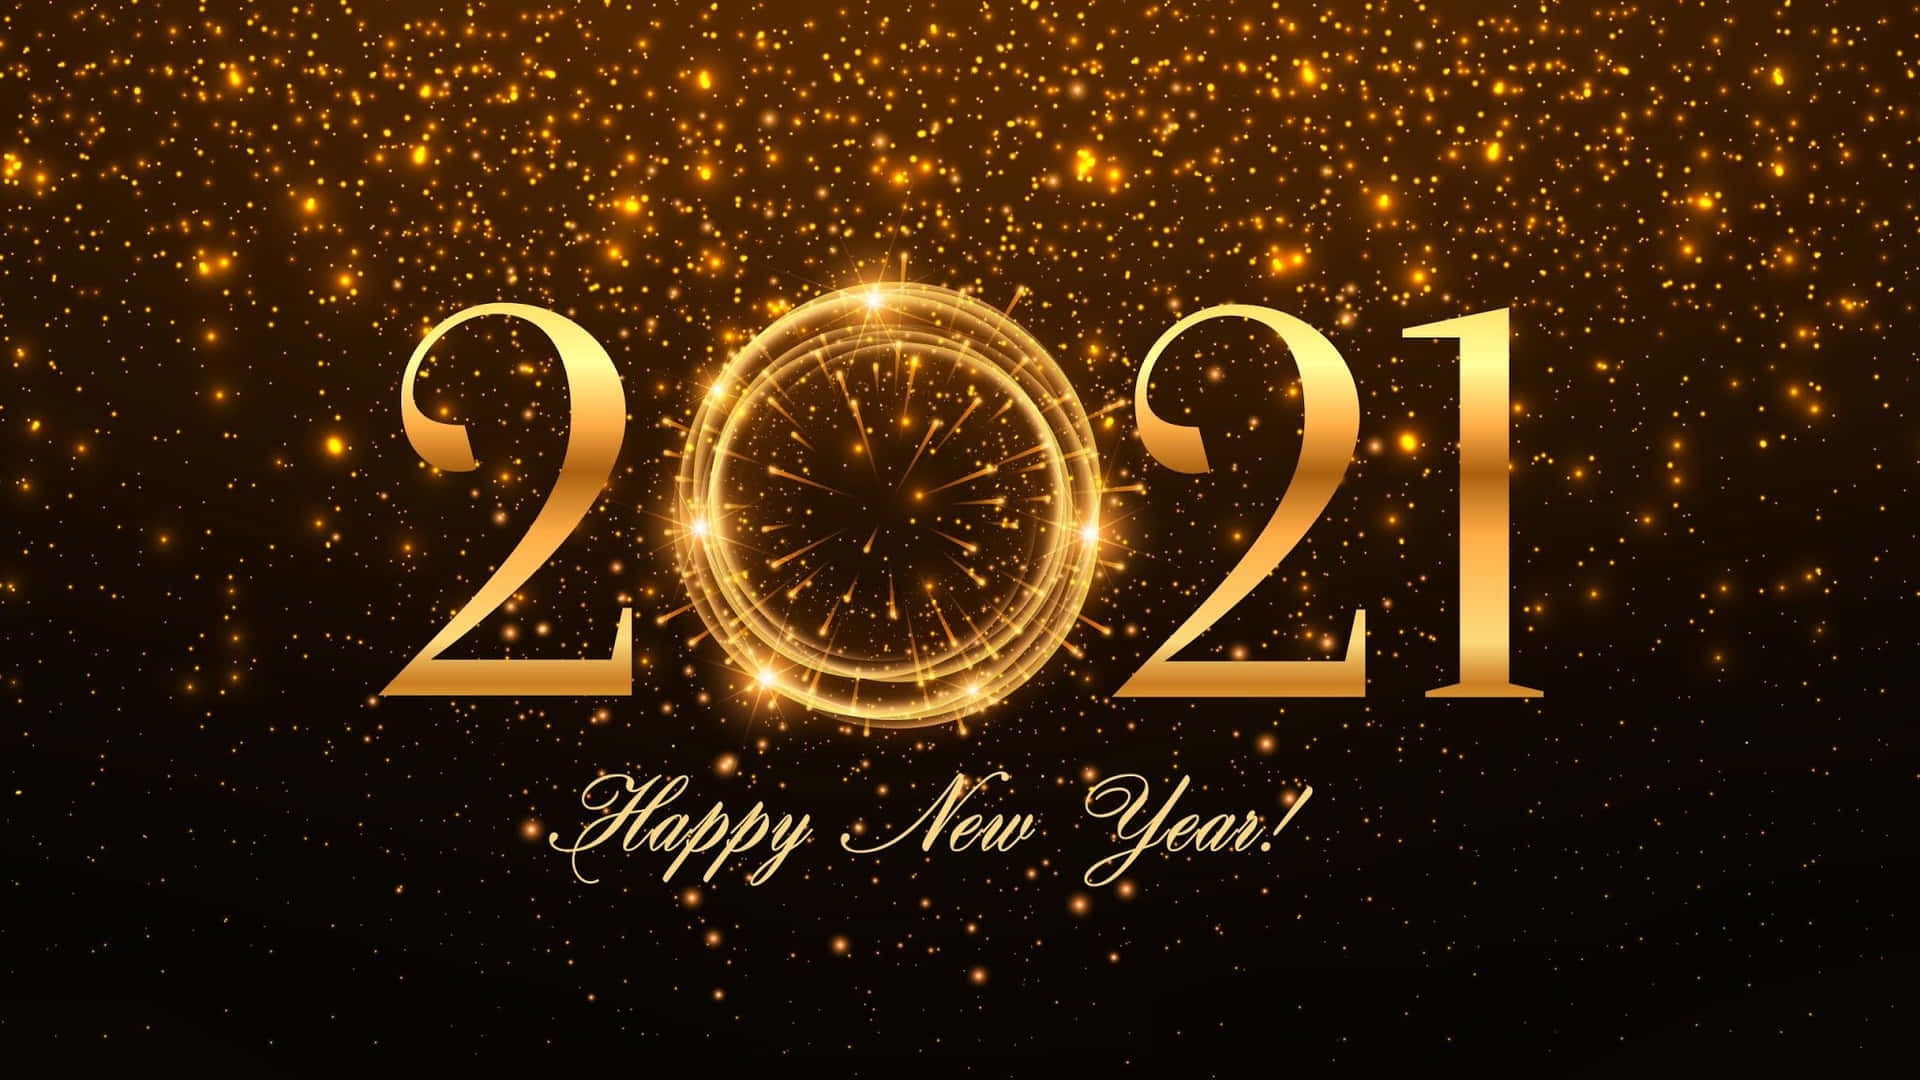 2021 Happy New Year Background Wallpaper